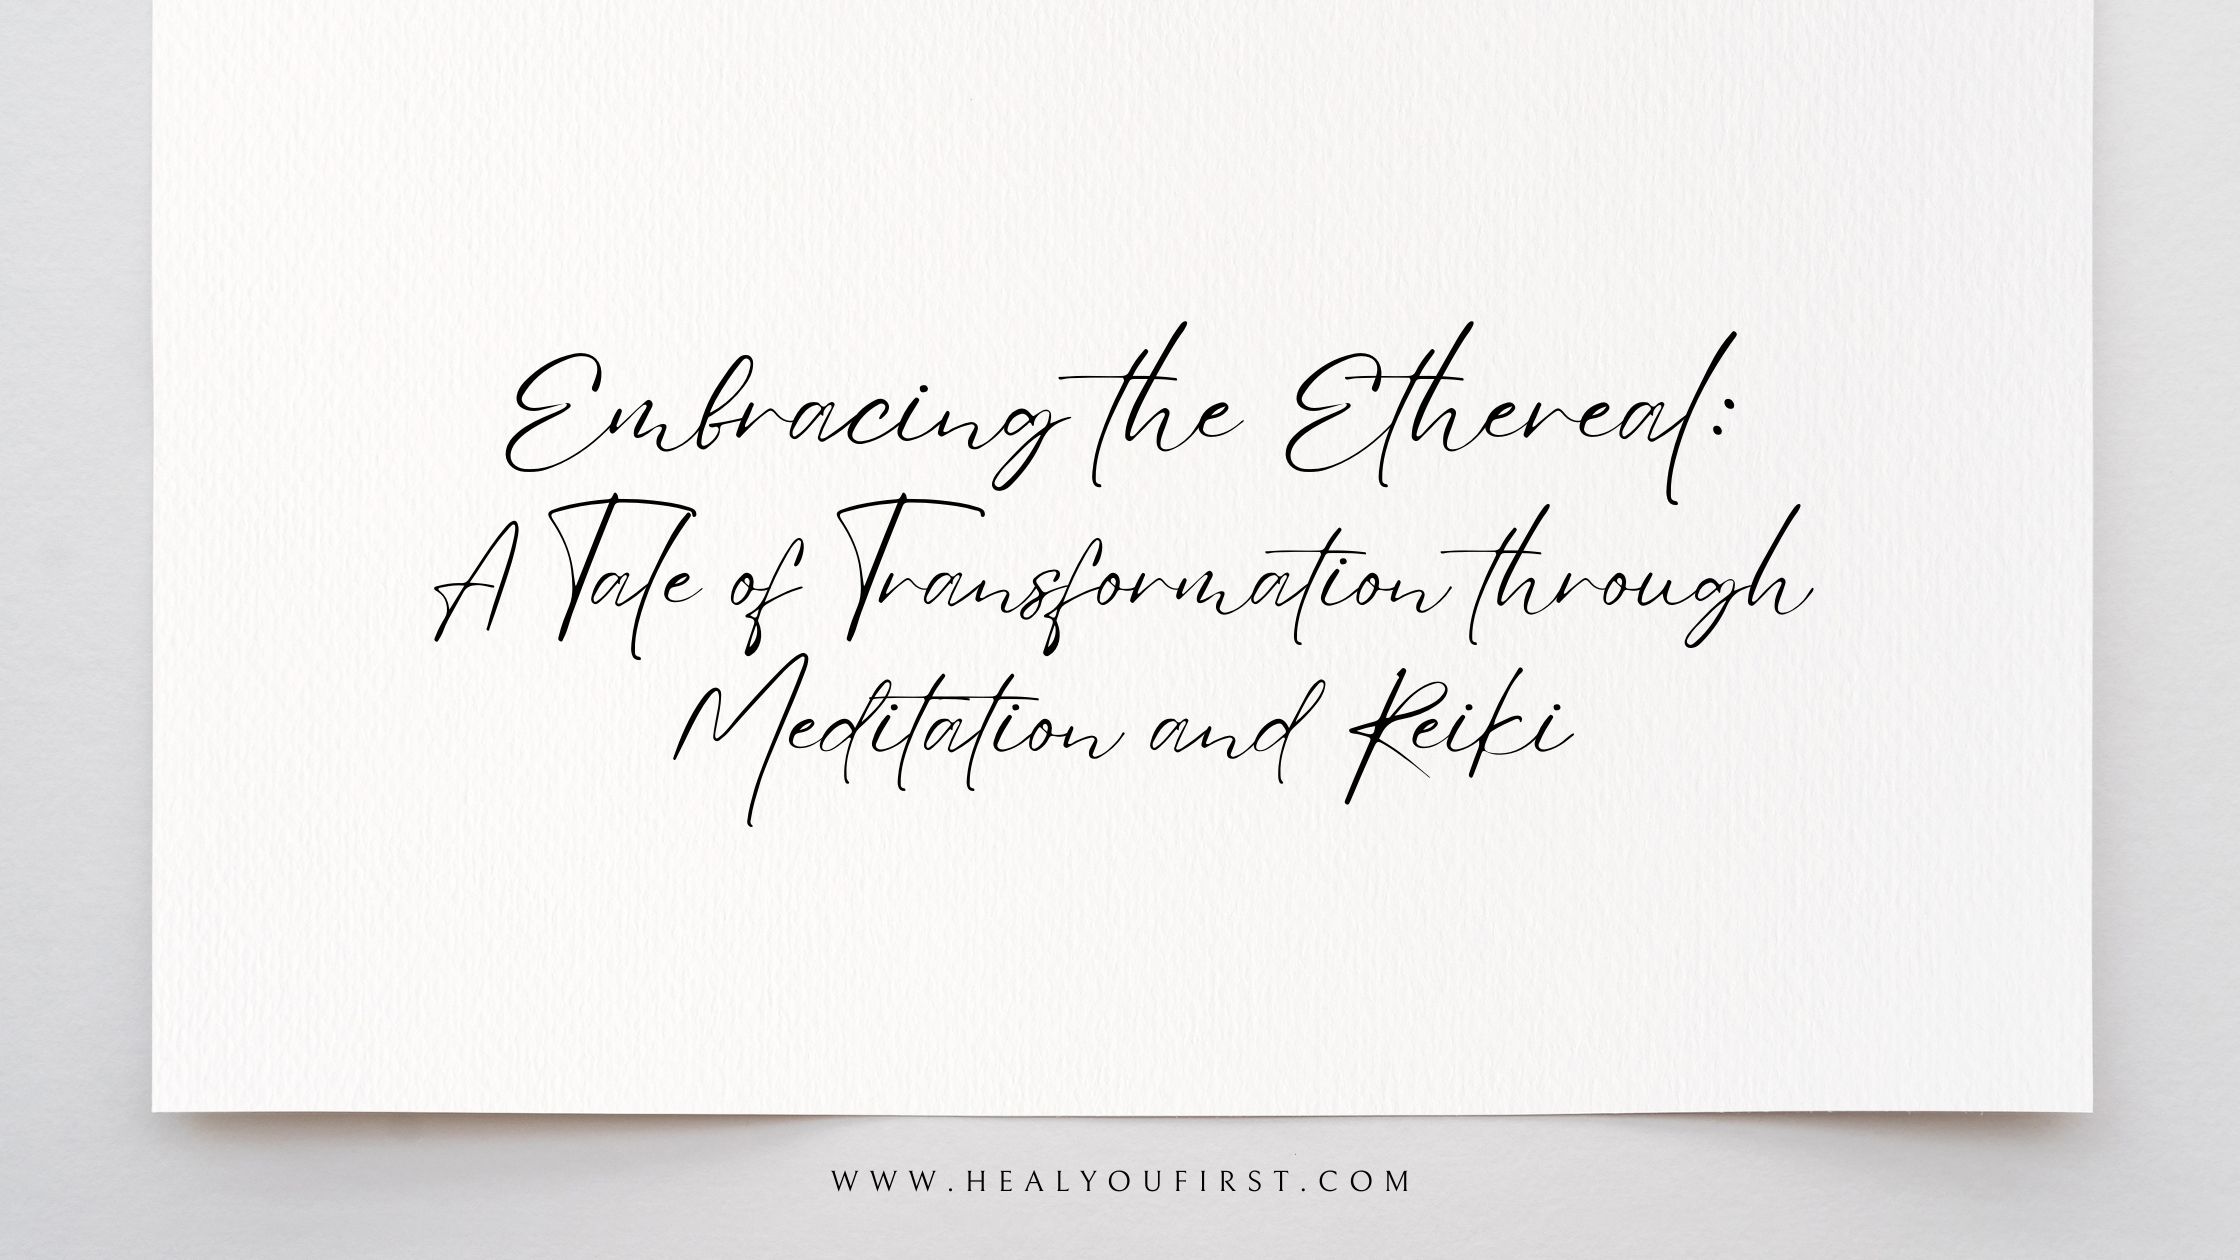 Embracing the Ethereal: A Tale of Transformation through Meditation and Reiki